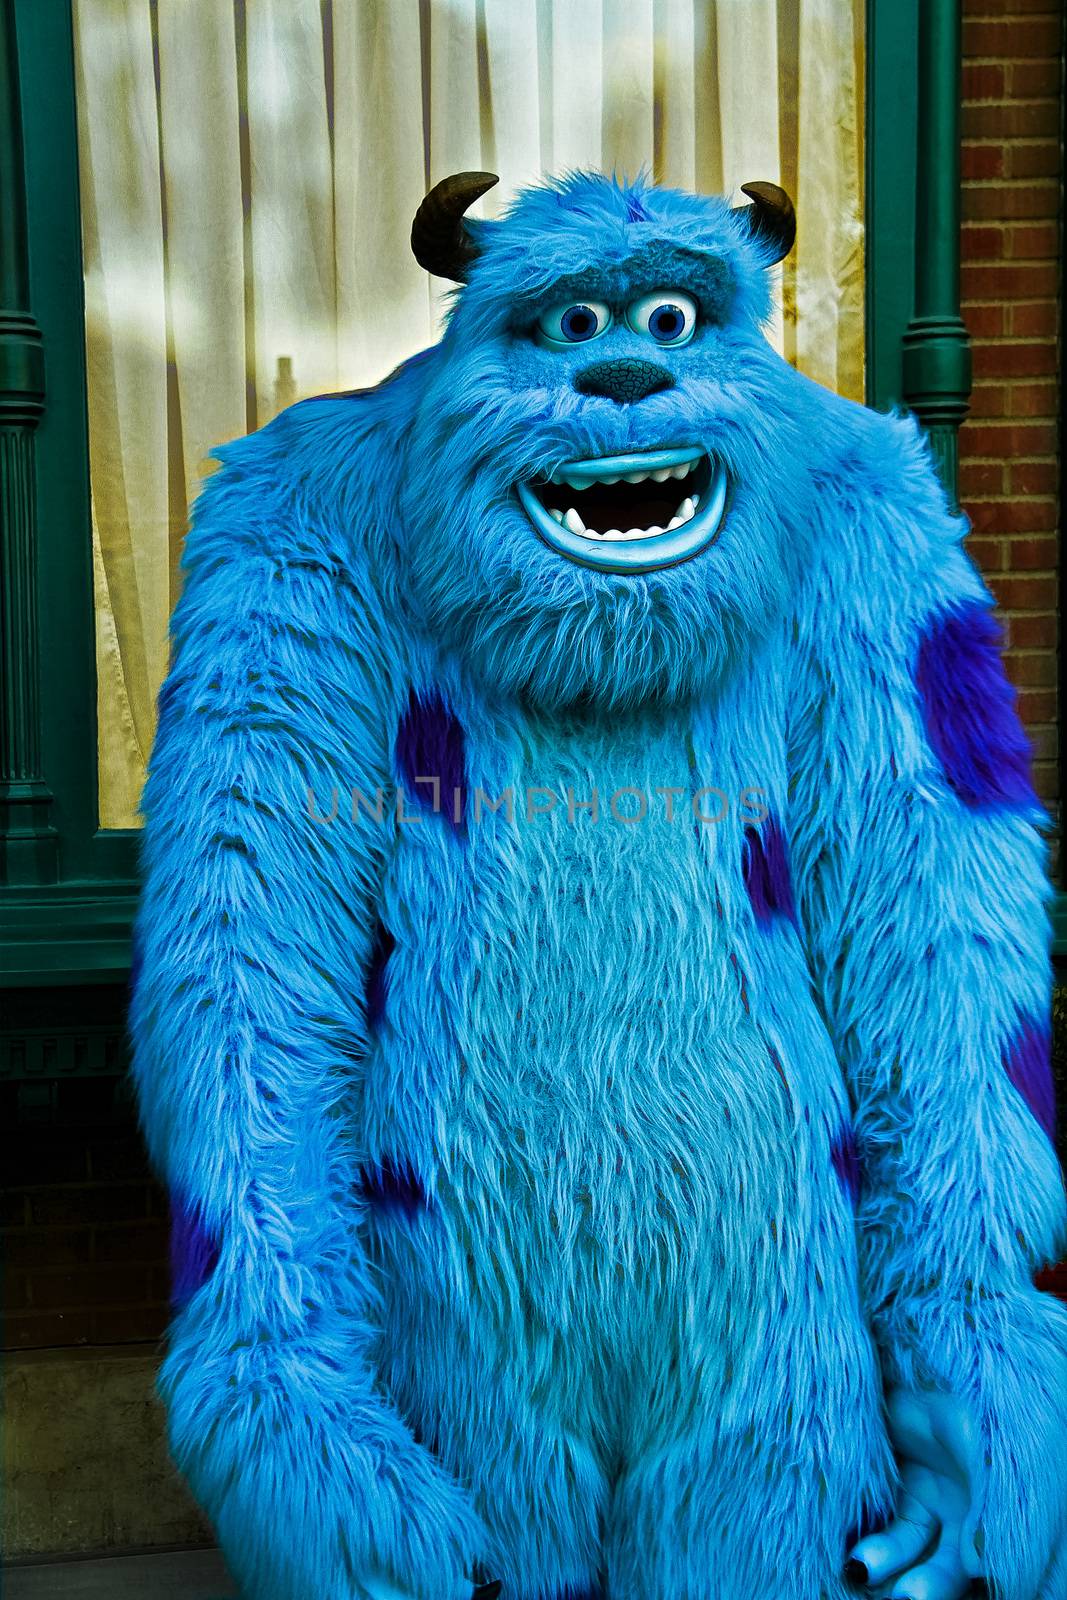 Anaheim,CA/USA - Nov 27, 2010 : A photo of James P. Sullivan, a monster character from Monster Inc at Disneyland in Anaheim.Disney Pixar animation. by USA-TARO